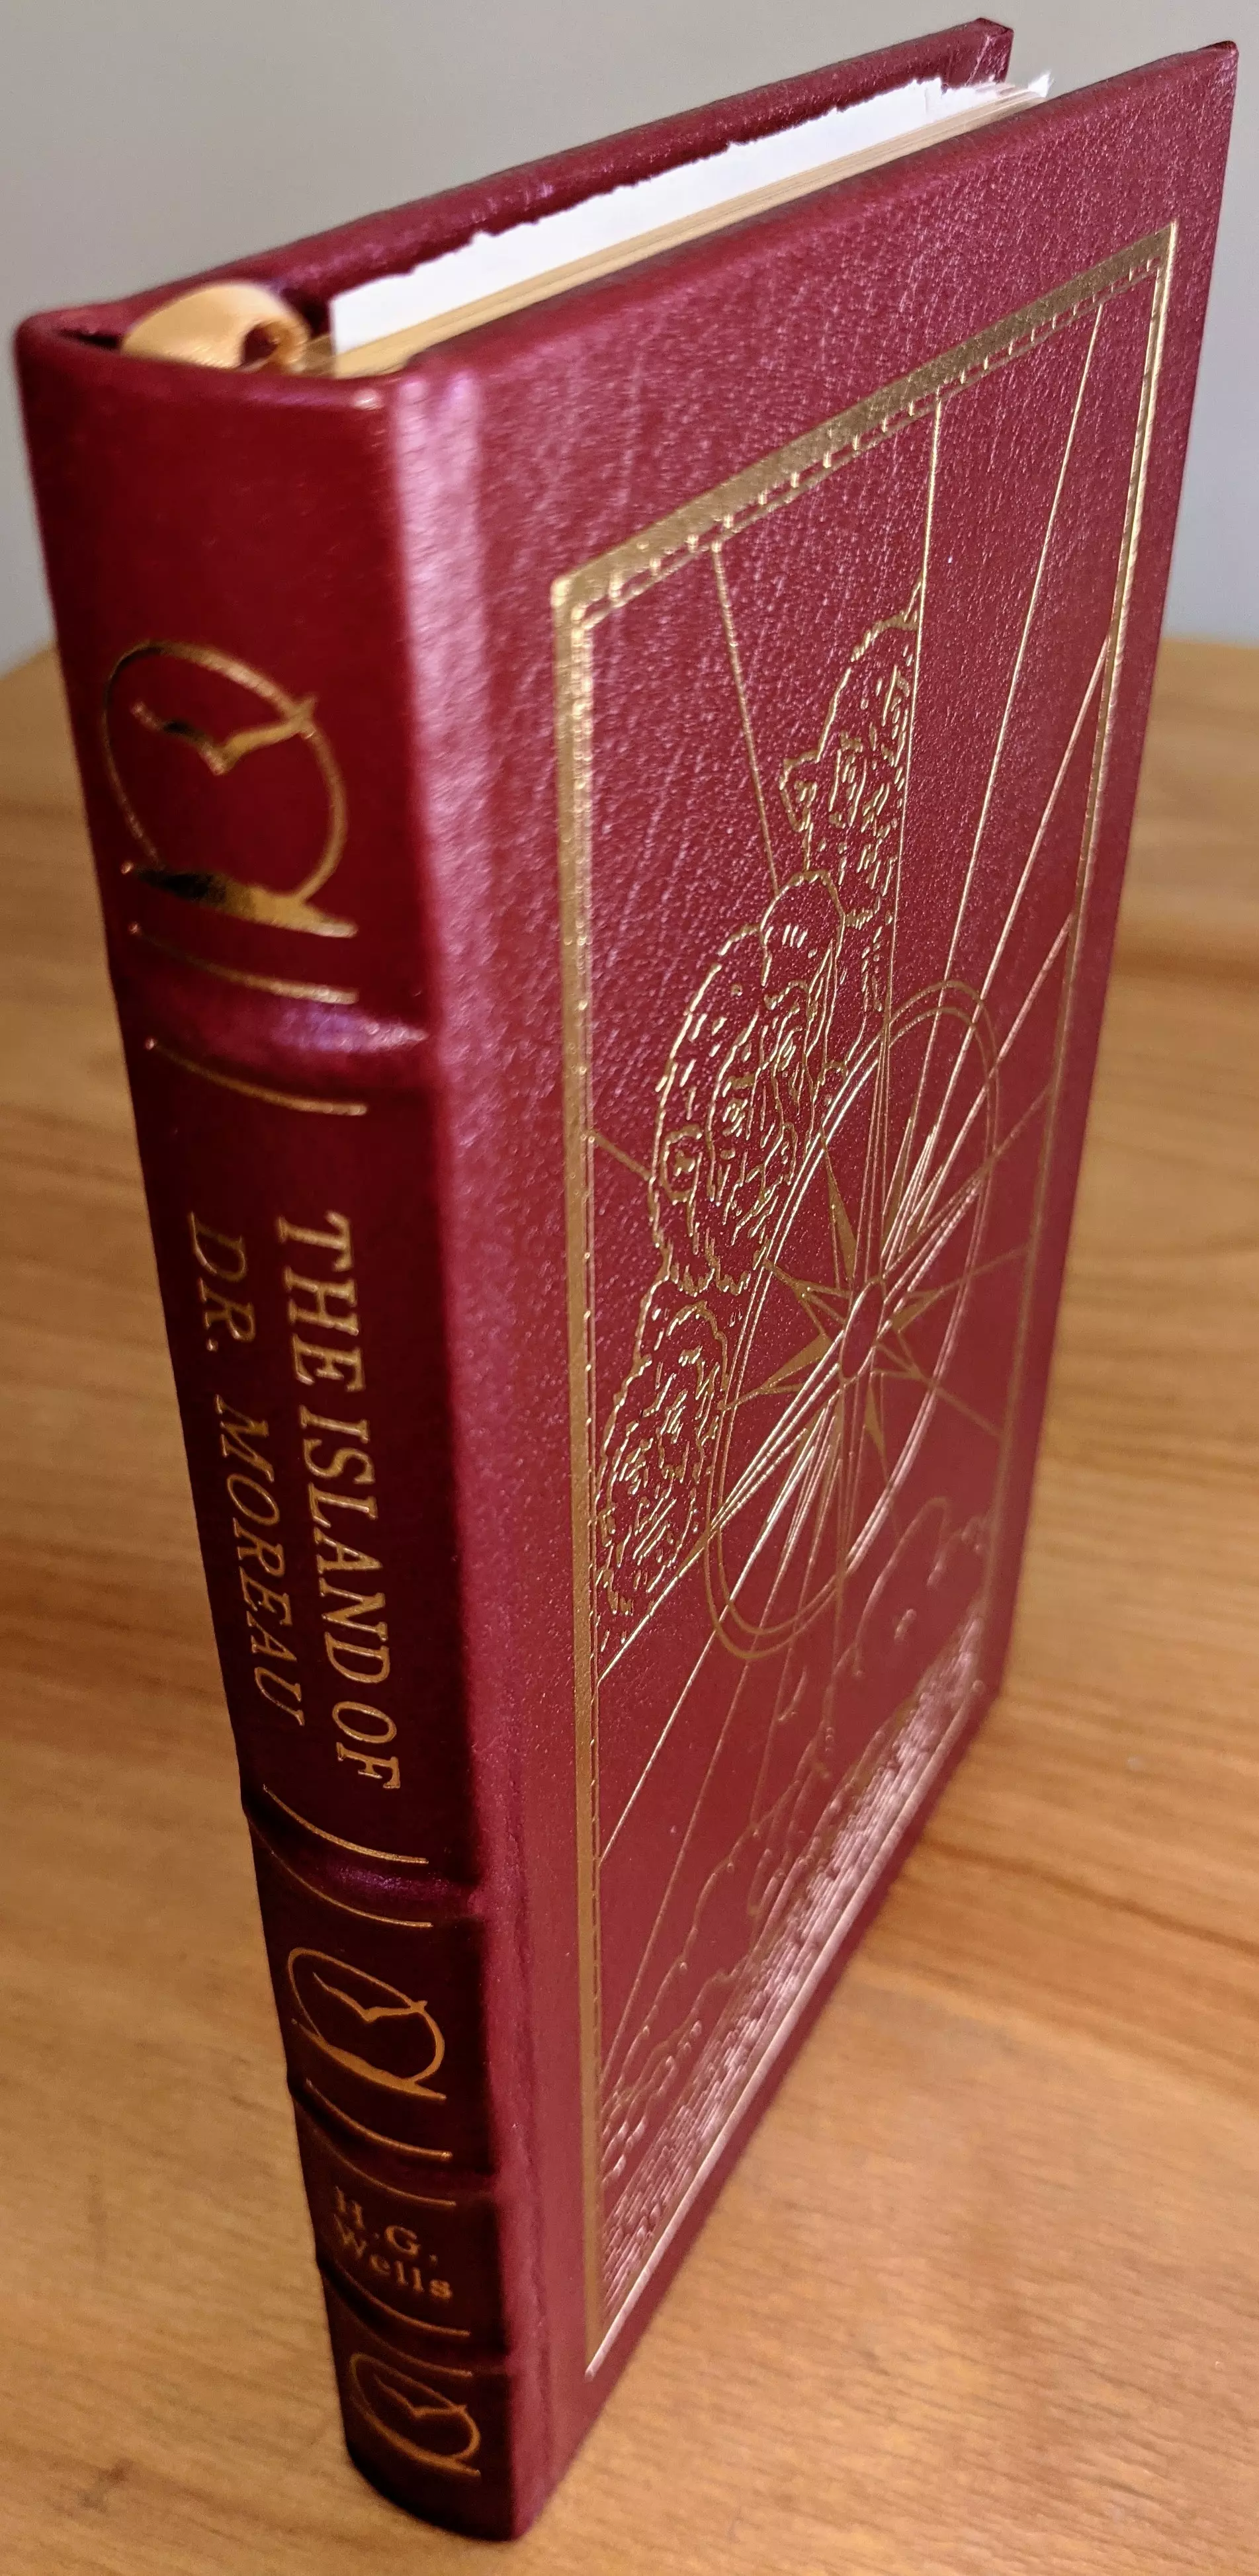 Stunning Red Leather Bound hardback book with hubbed spine, cover artwork in 22kt gold, printed on archival paper with gold gilded edges, smyth sewing & concealed muslin joints
	  - original artwork by Jeff Fisher